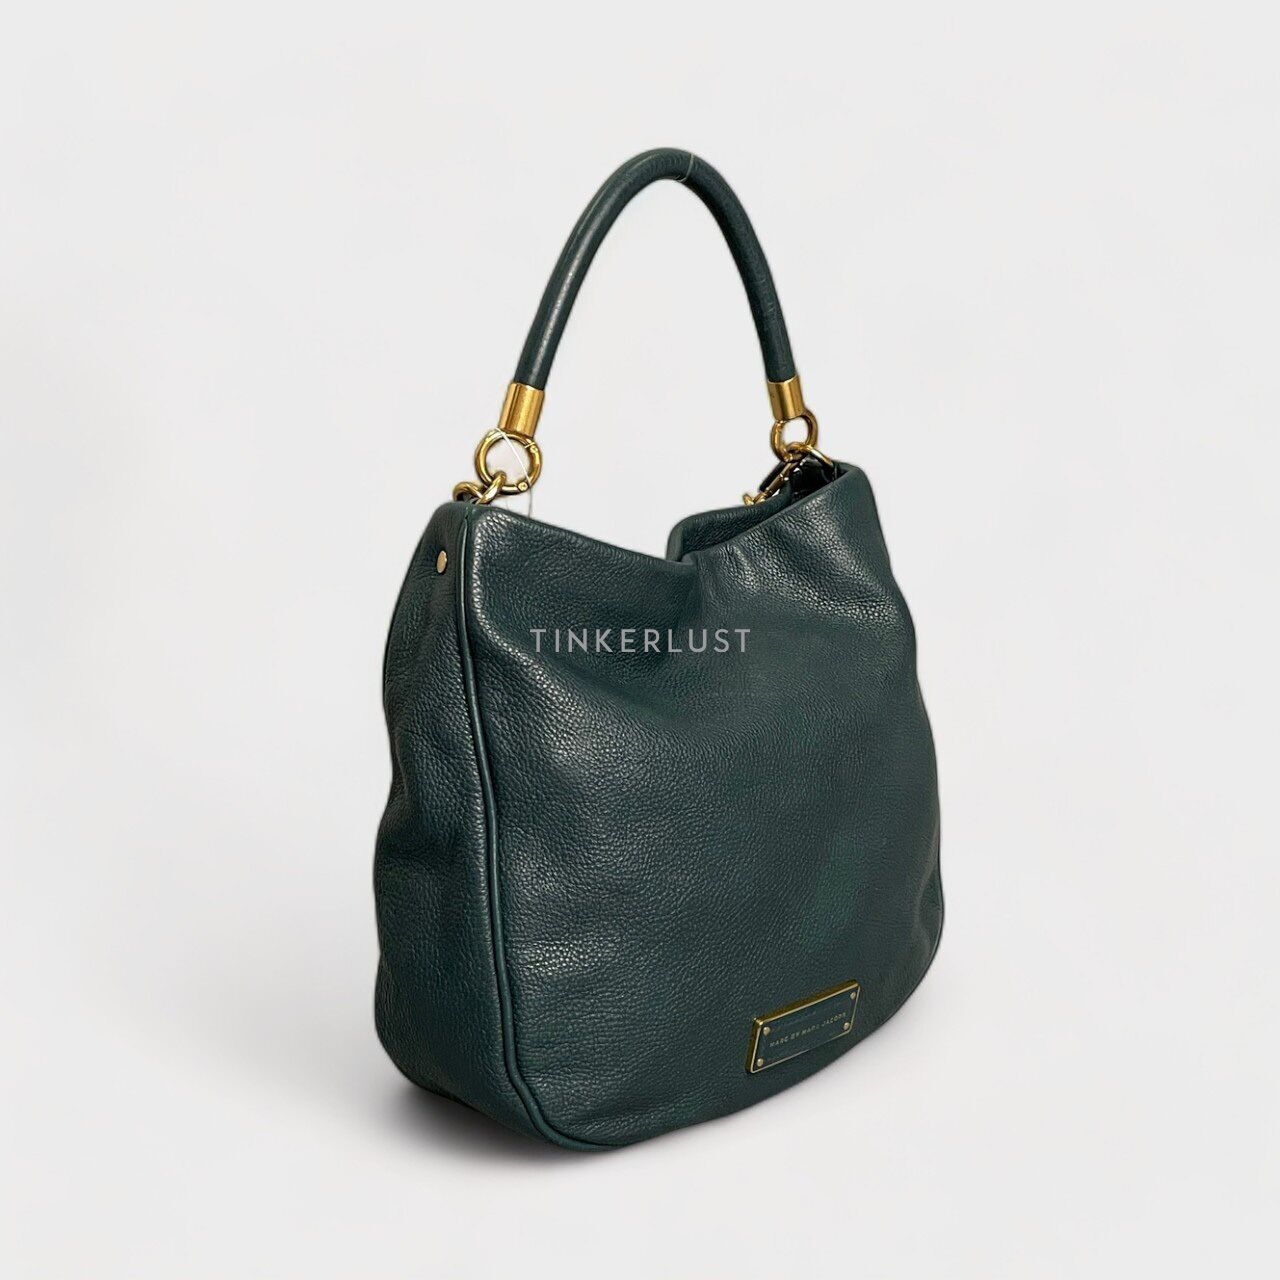 Marc by Marc Jacobs Too Hot to Handle Emerald Leather Hobo Bag